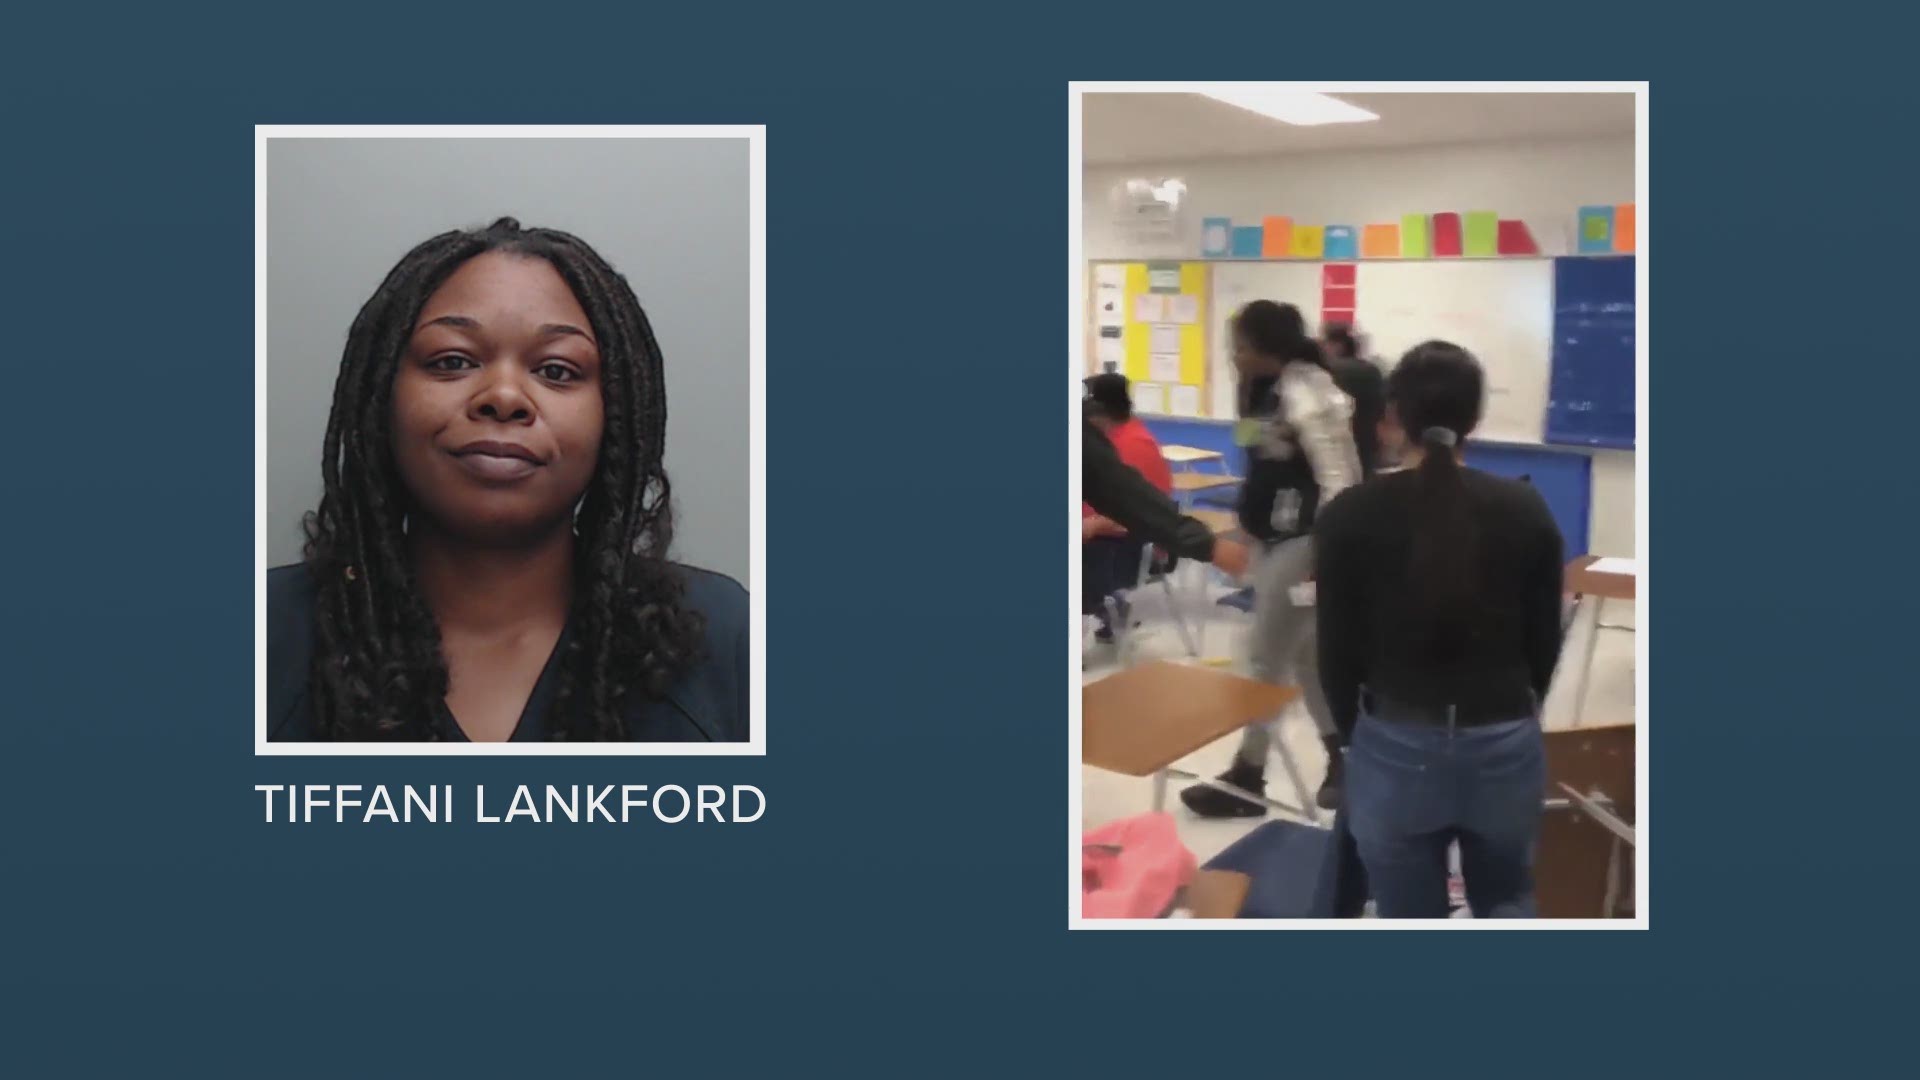 Tiffani Lankford, the substitute teacher accused of attacking a Lehman High School student, reportedly called another student a "crybaby" in front of peers.